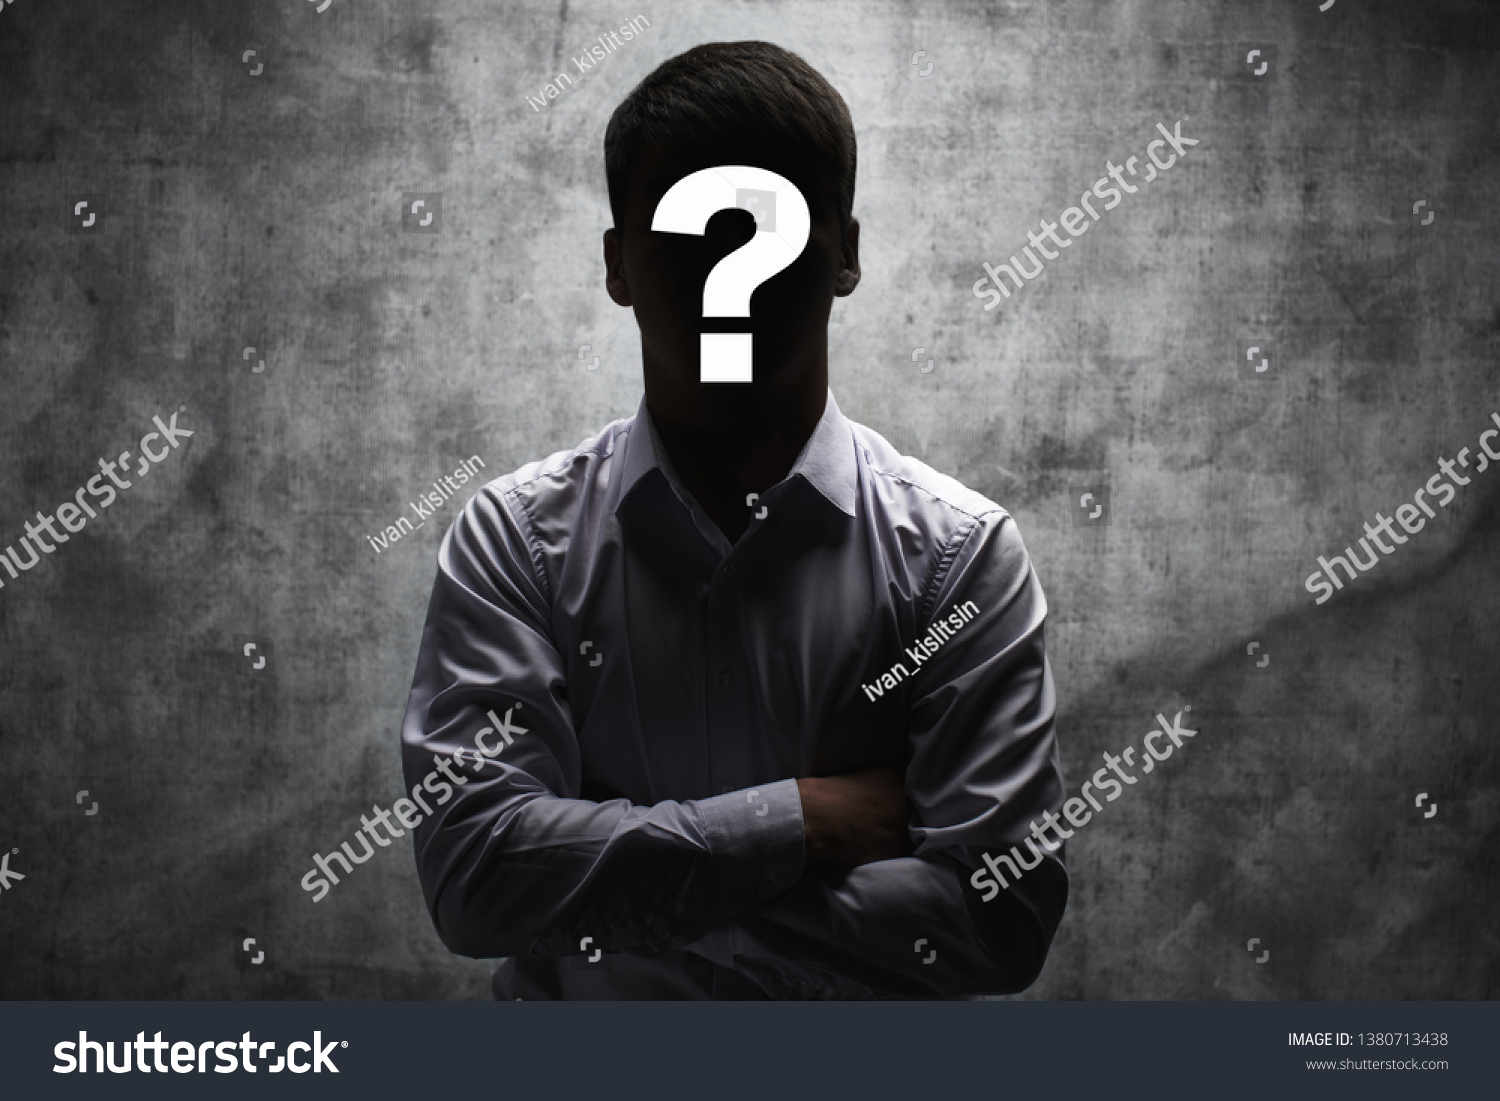 351,170 Mystery person Images, Stock Photos & Vectors | Shutterstock